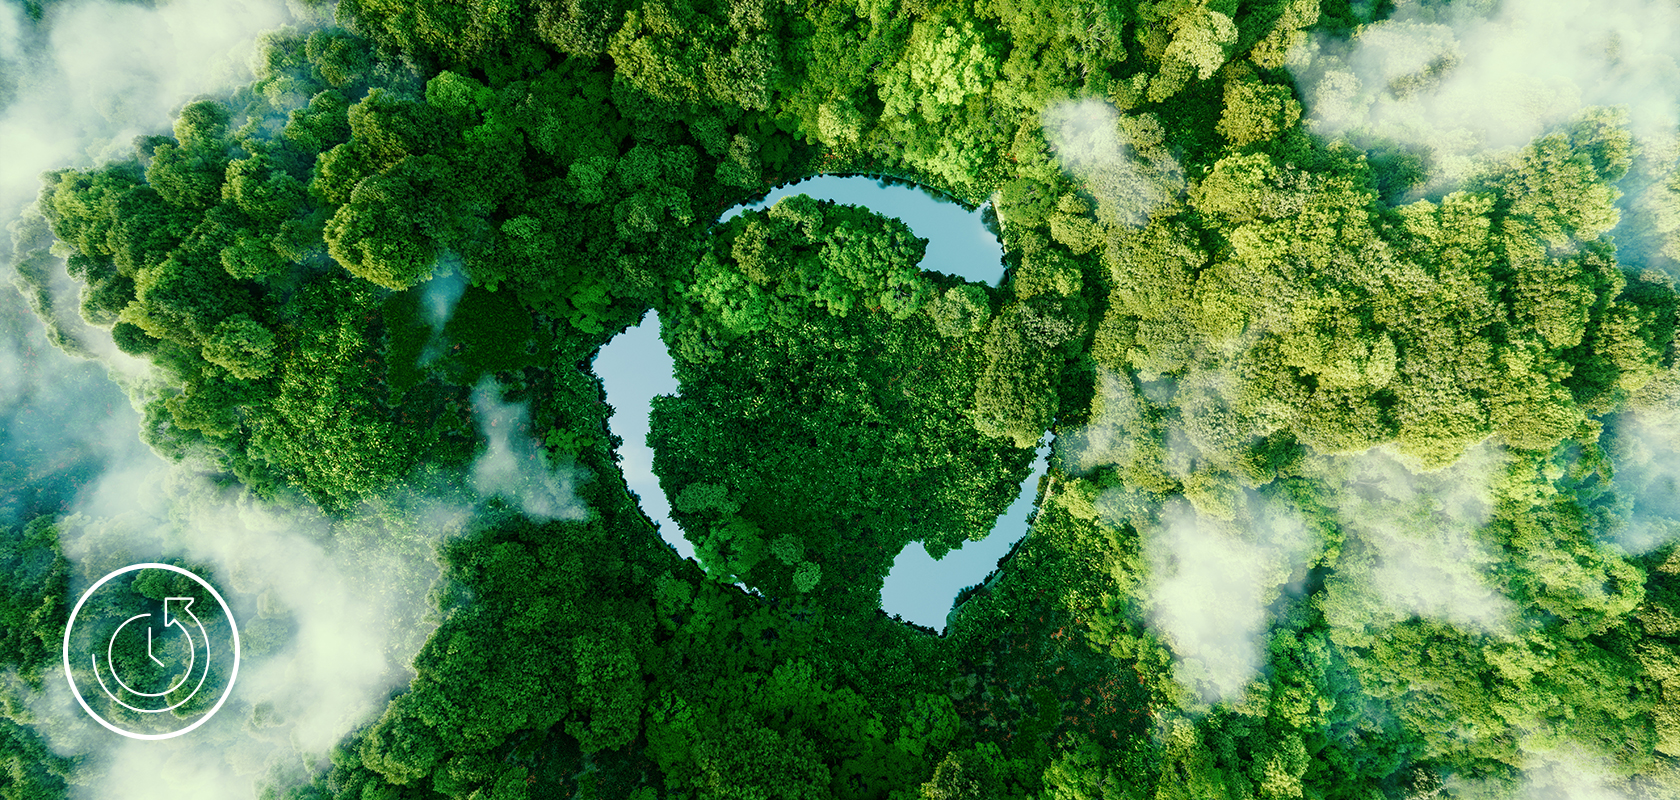 An aerial view of a lush forest with a striking circular clearing, symbolizing an eco-friendly initiative or the power of nature.